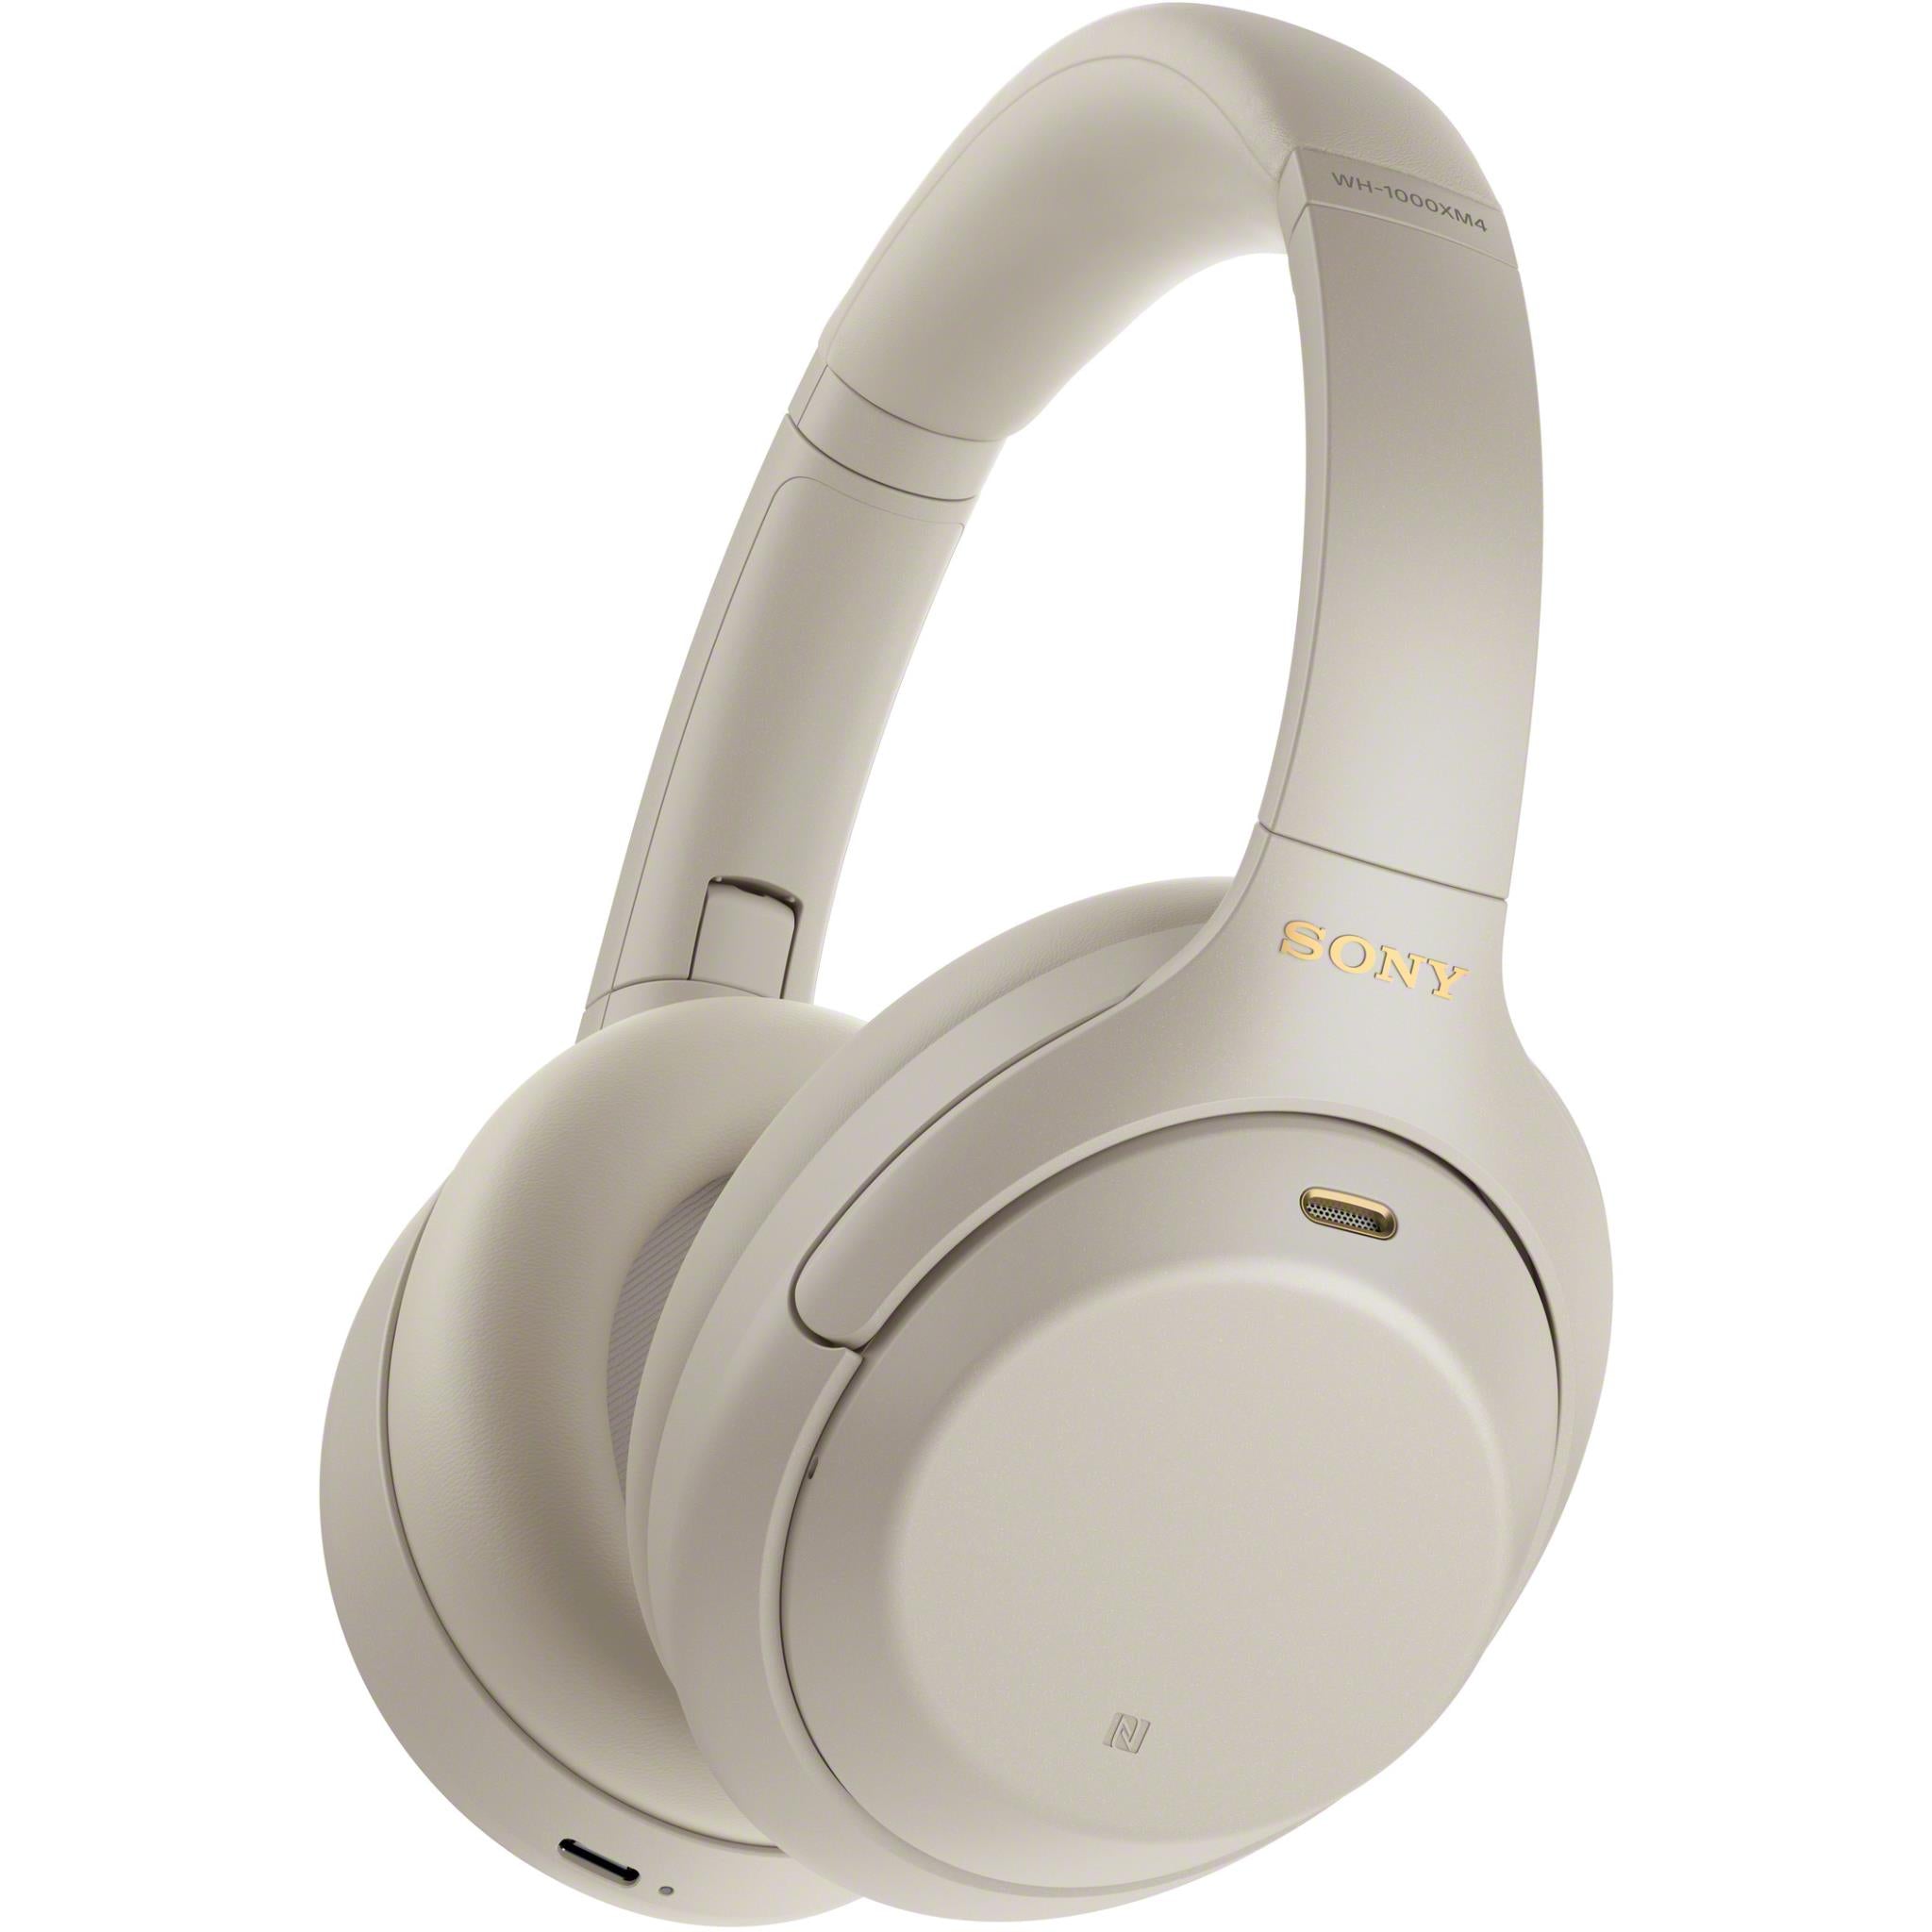 Audio Clearance Products Heavily Discounted at JB Hi-Fi